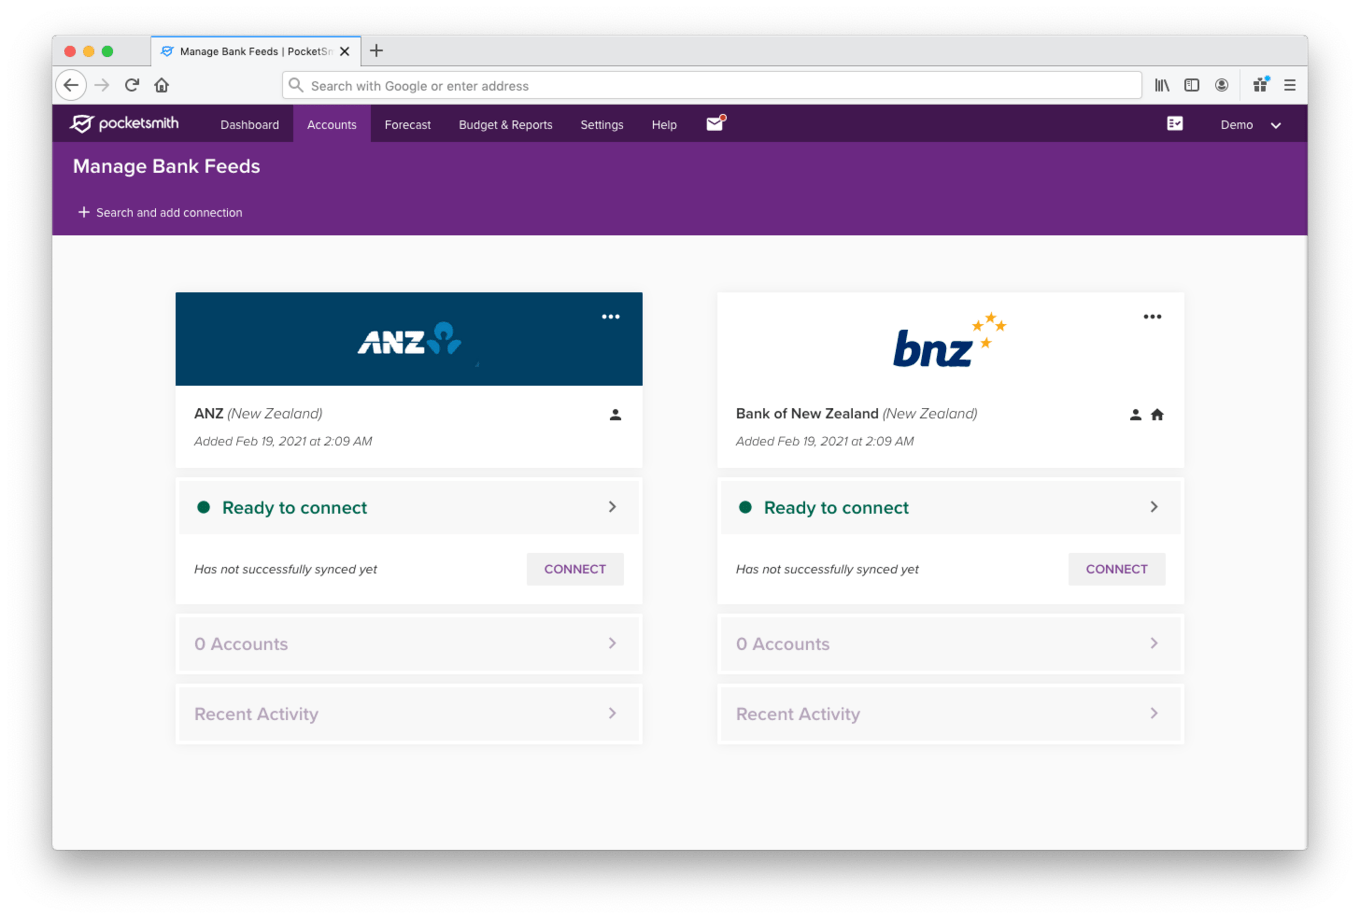 Connections page with "Ready to authorize"